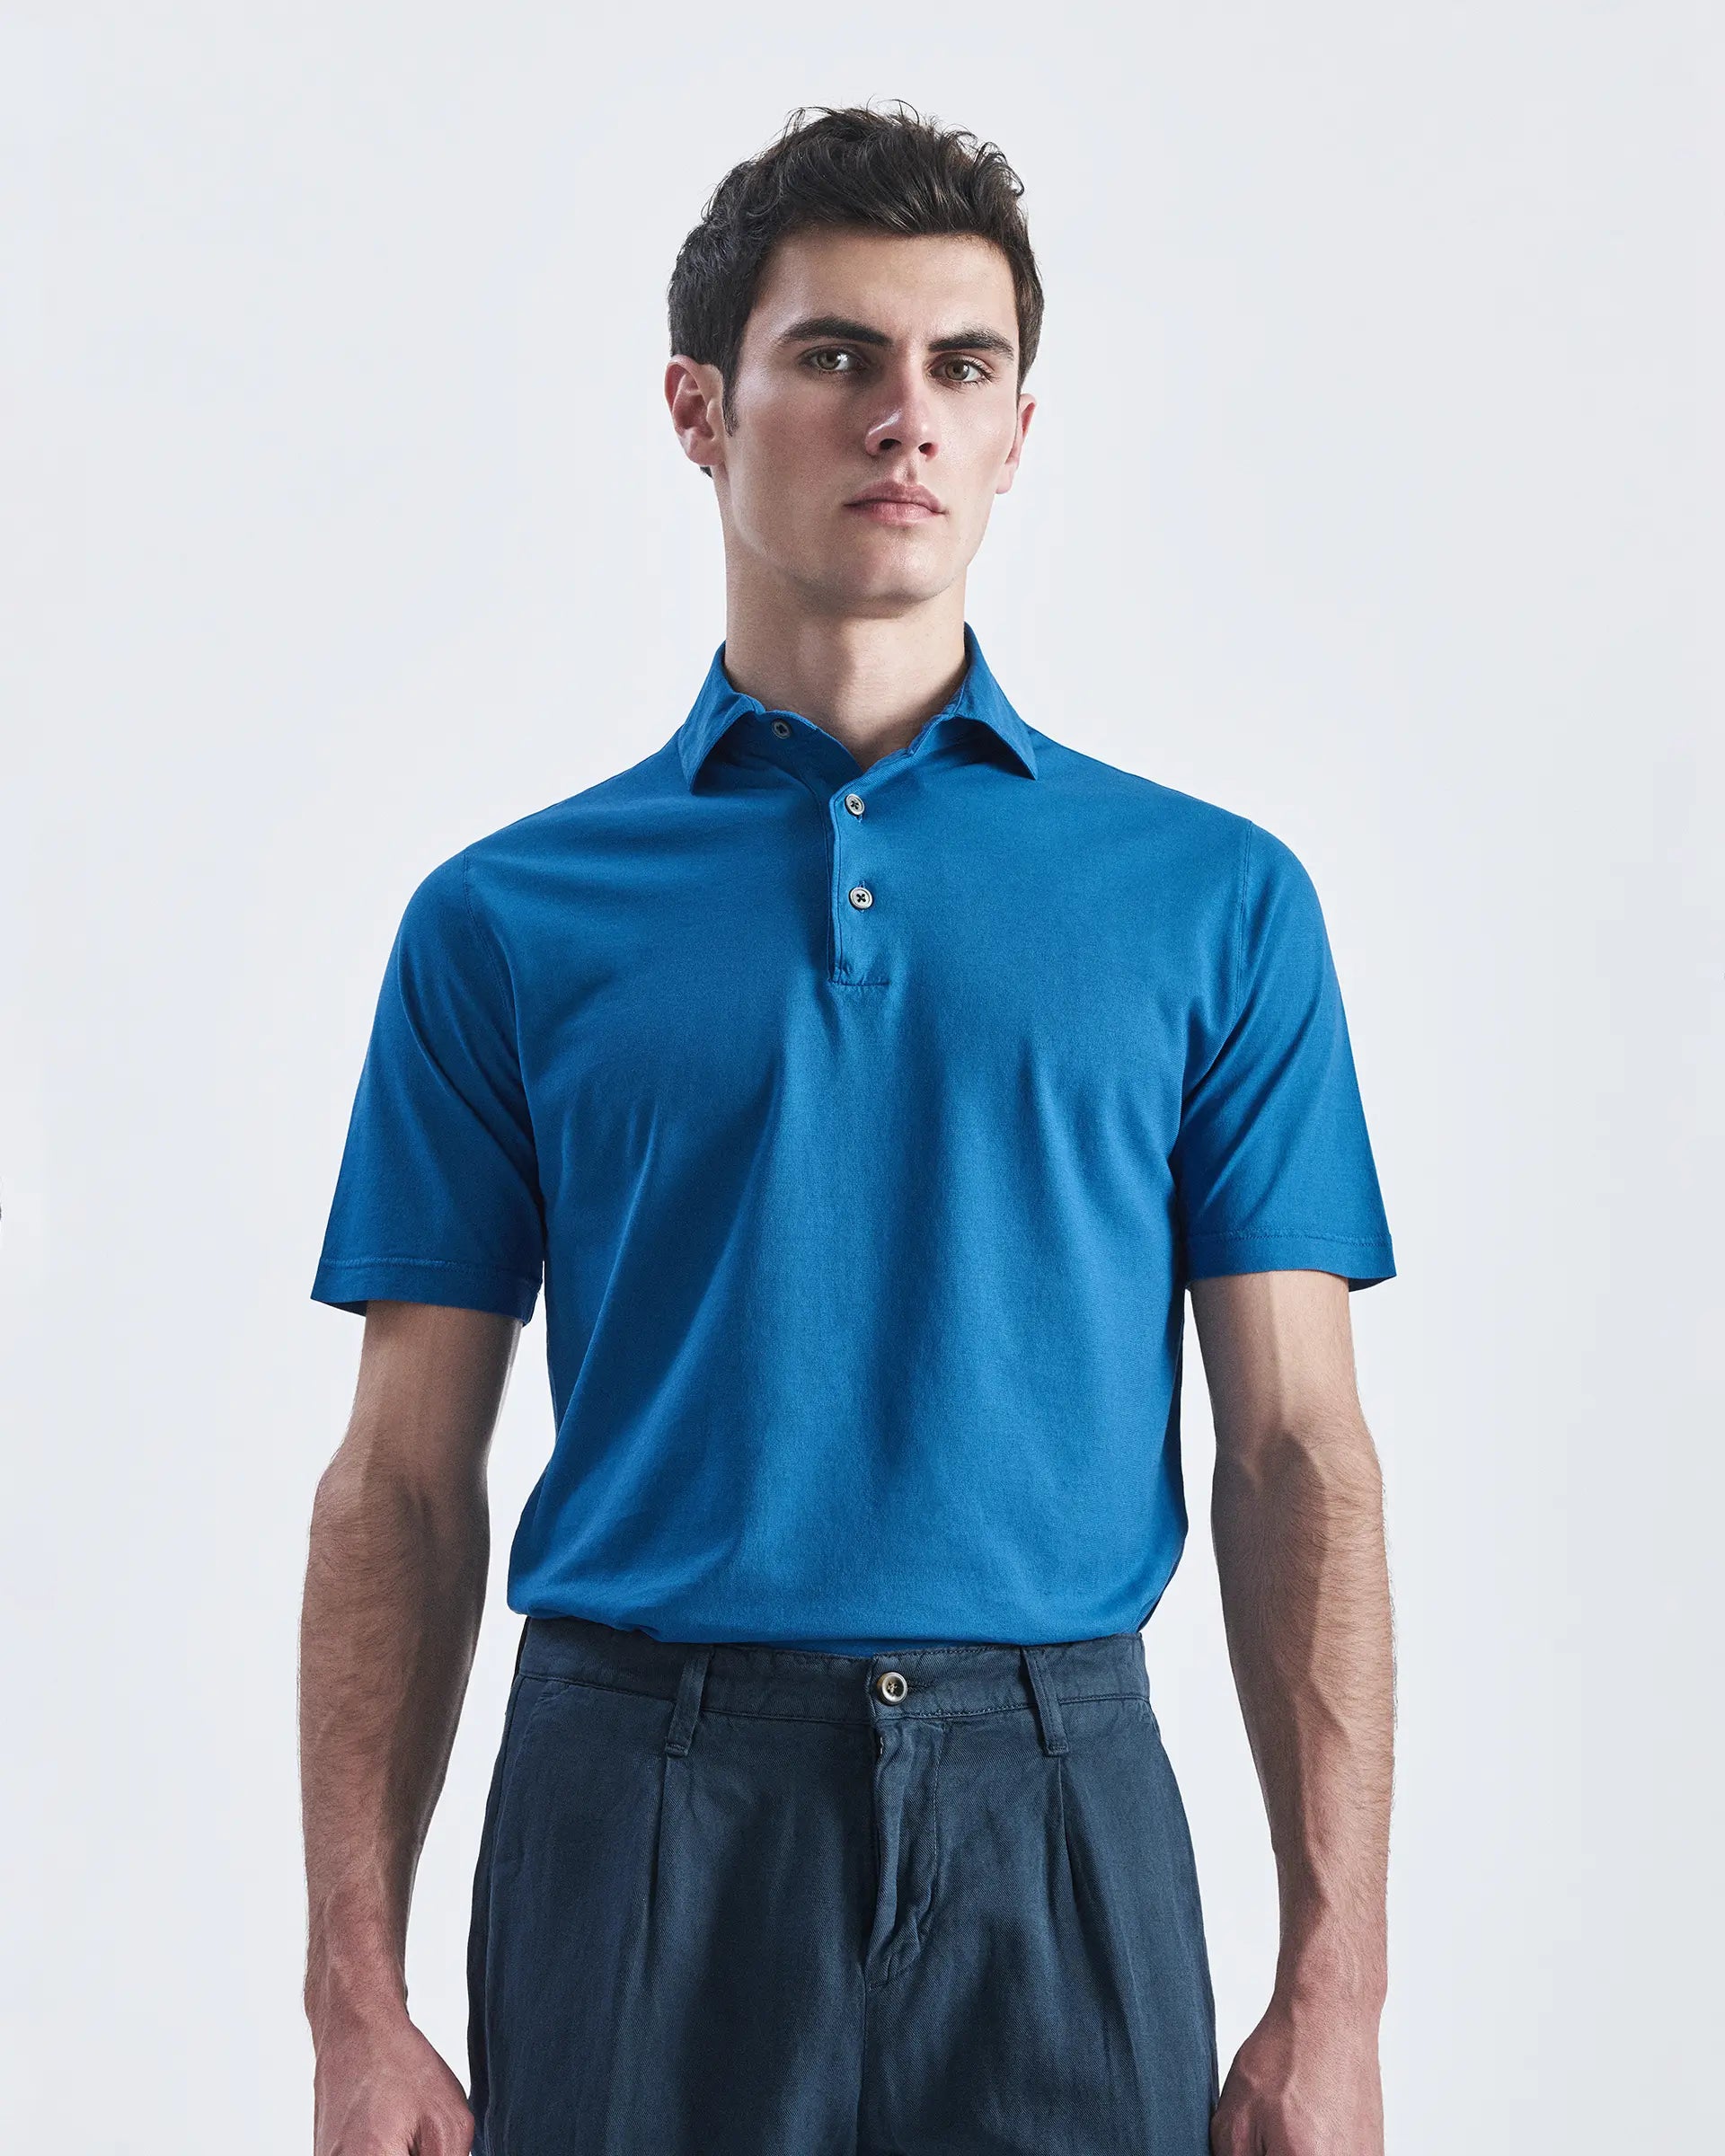 Light blue short sleeve polo shirt in pure crepe cotton